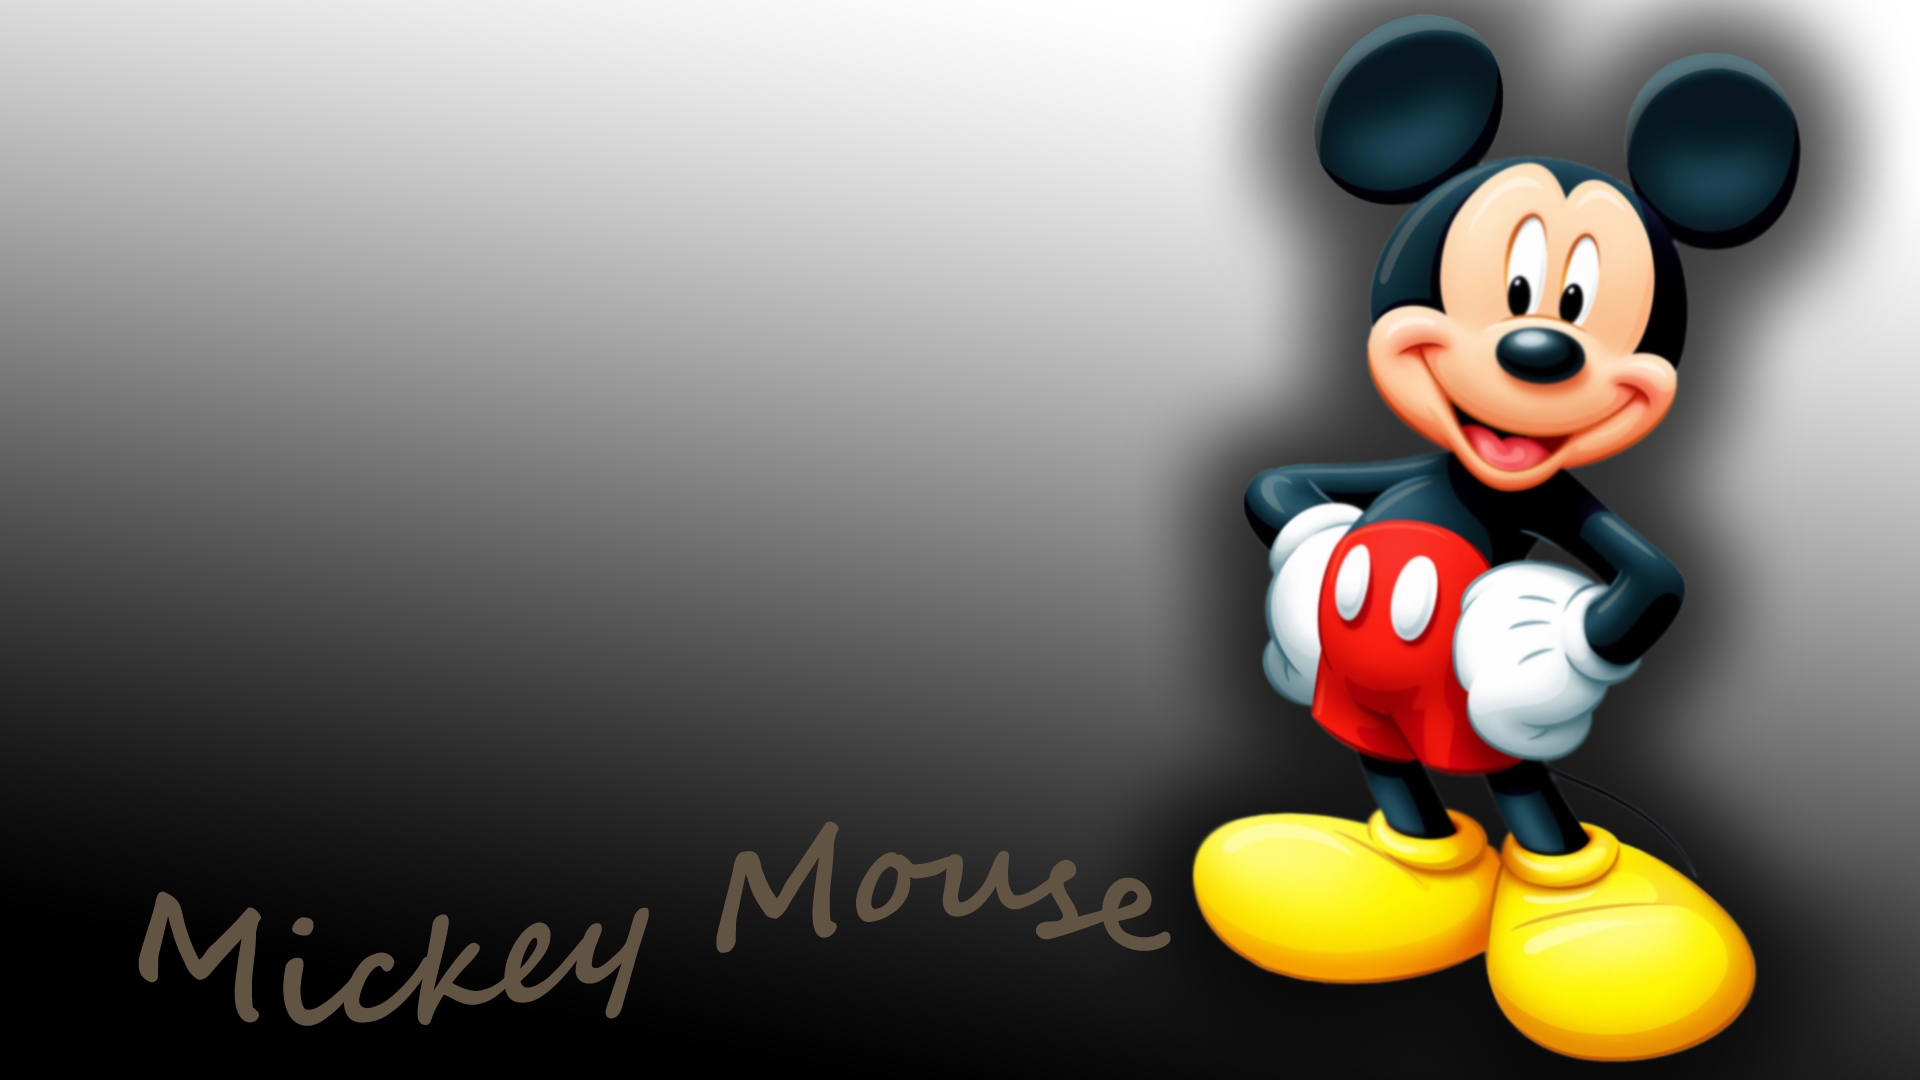 Mickey Mouse Wallpaper 18 - Best Wallpaper Collection